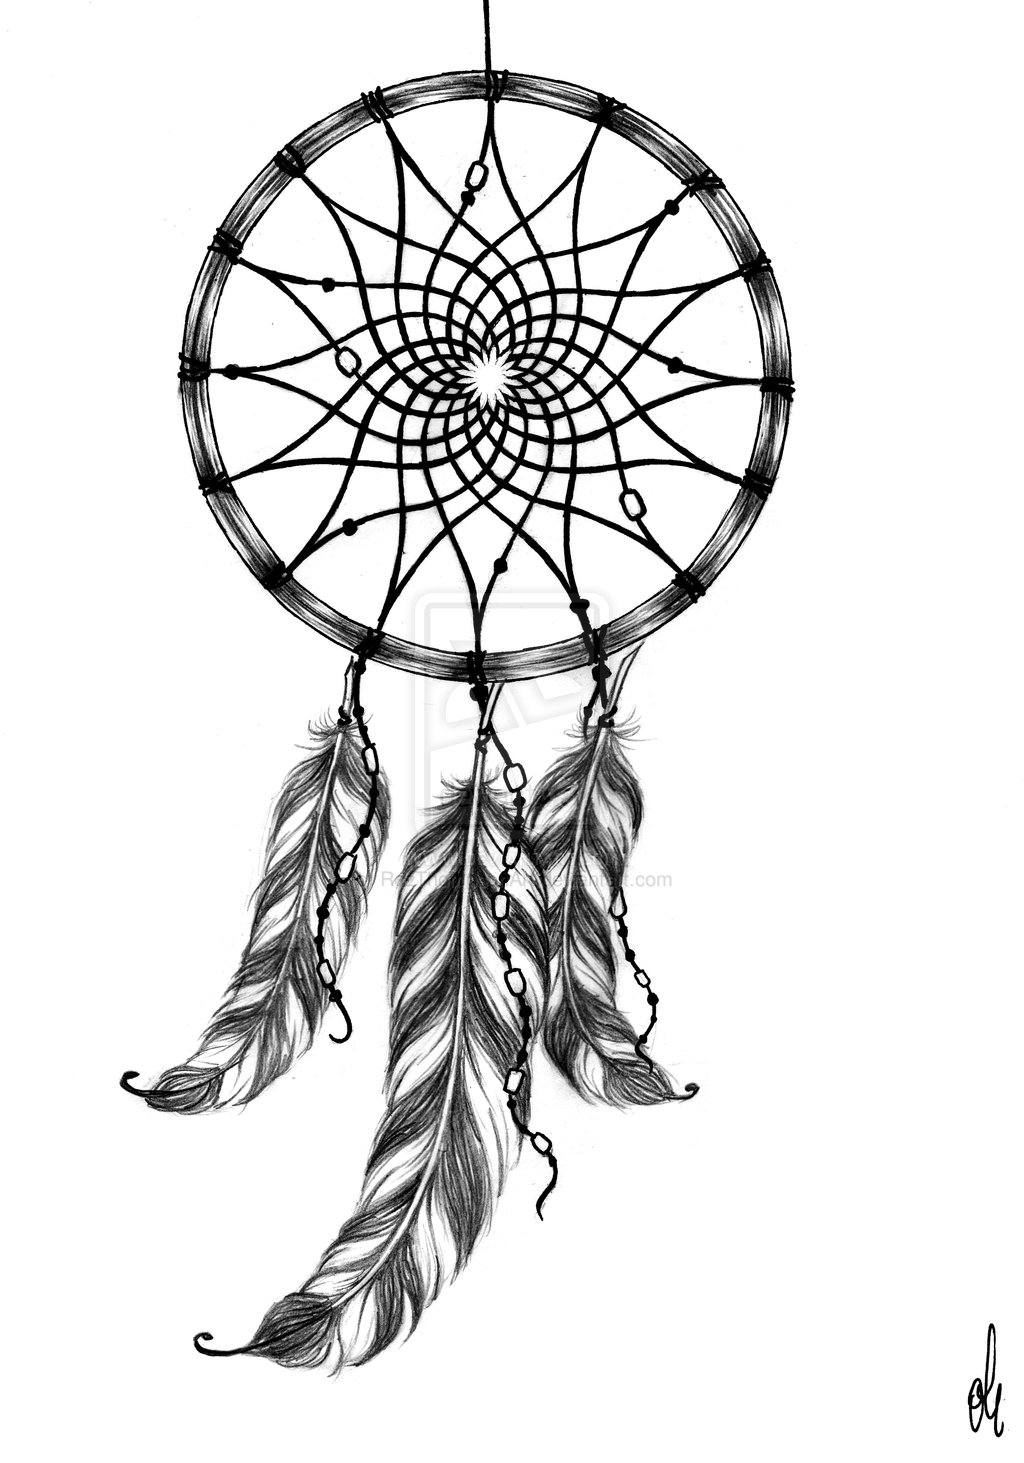 Contour Beauty Dream Catcher With Feathers Design High-Res Vector Graphic -  Getty Images